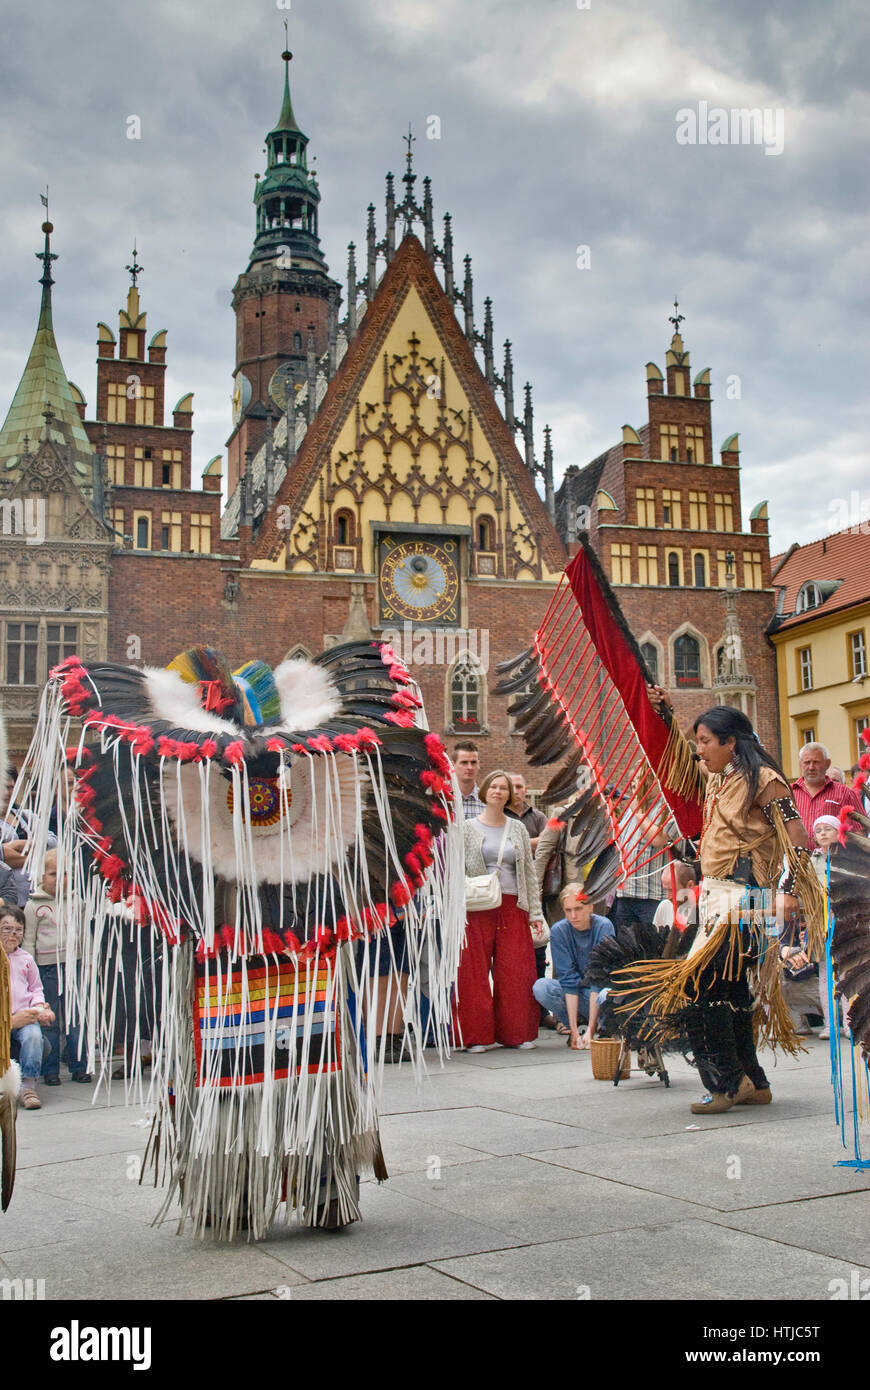 South American Indians performing at Rynek in front of medieval Town Hall in Wroclaw, Lower Silesia, Poland Stock Photo